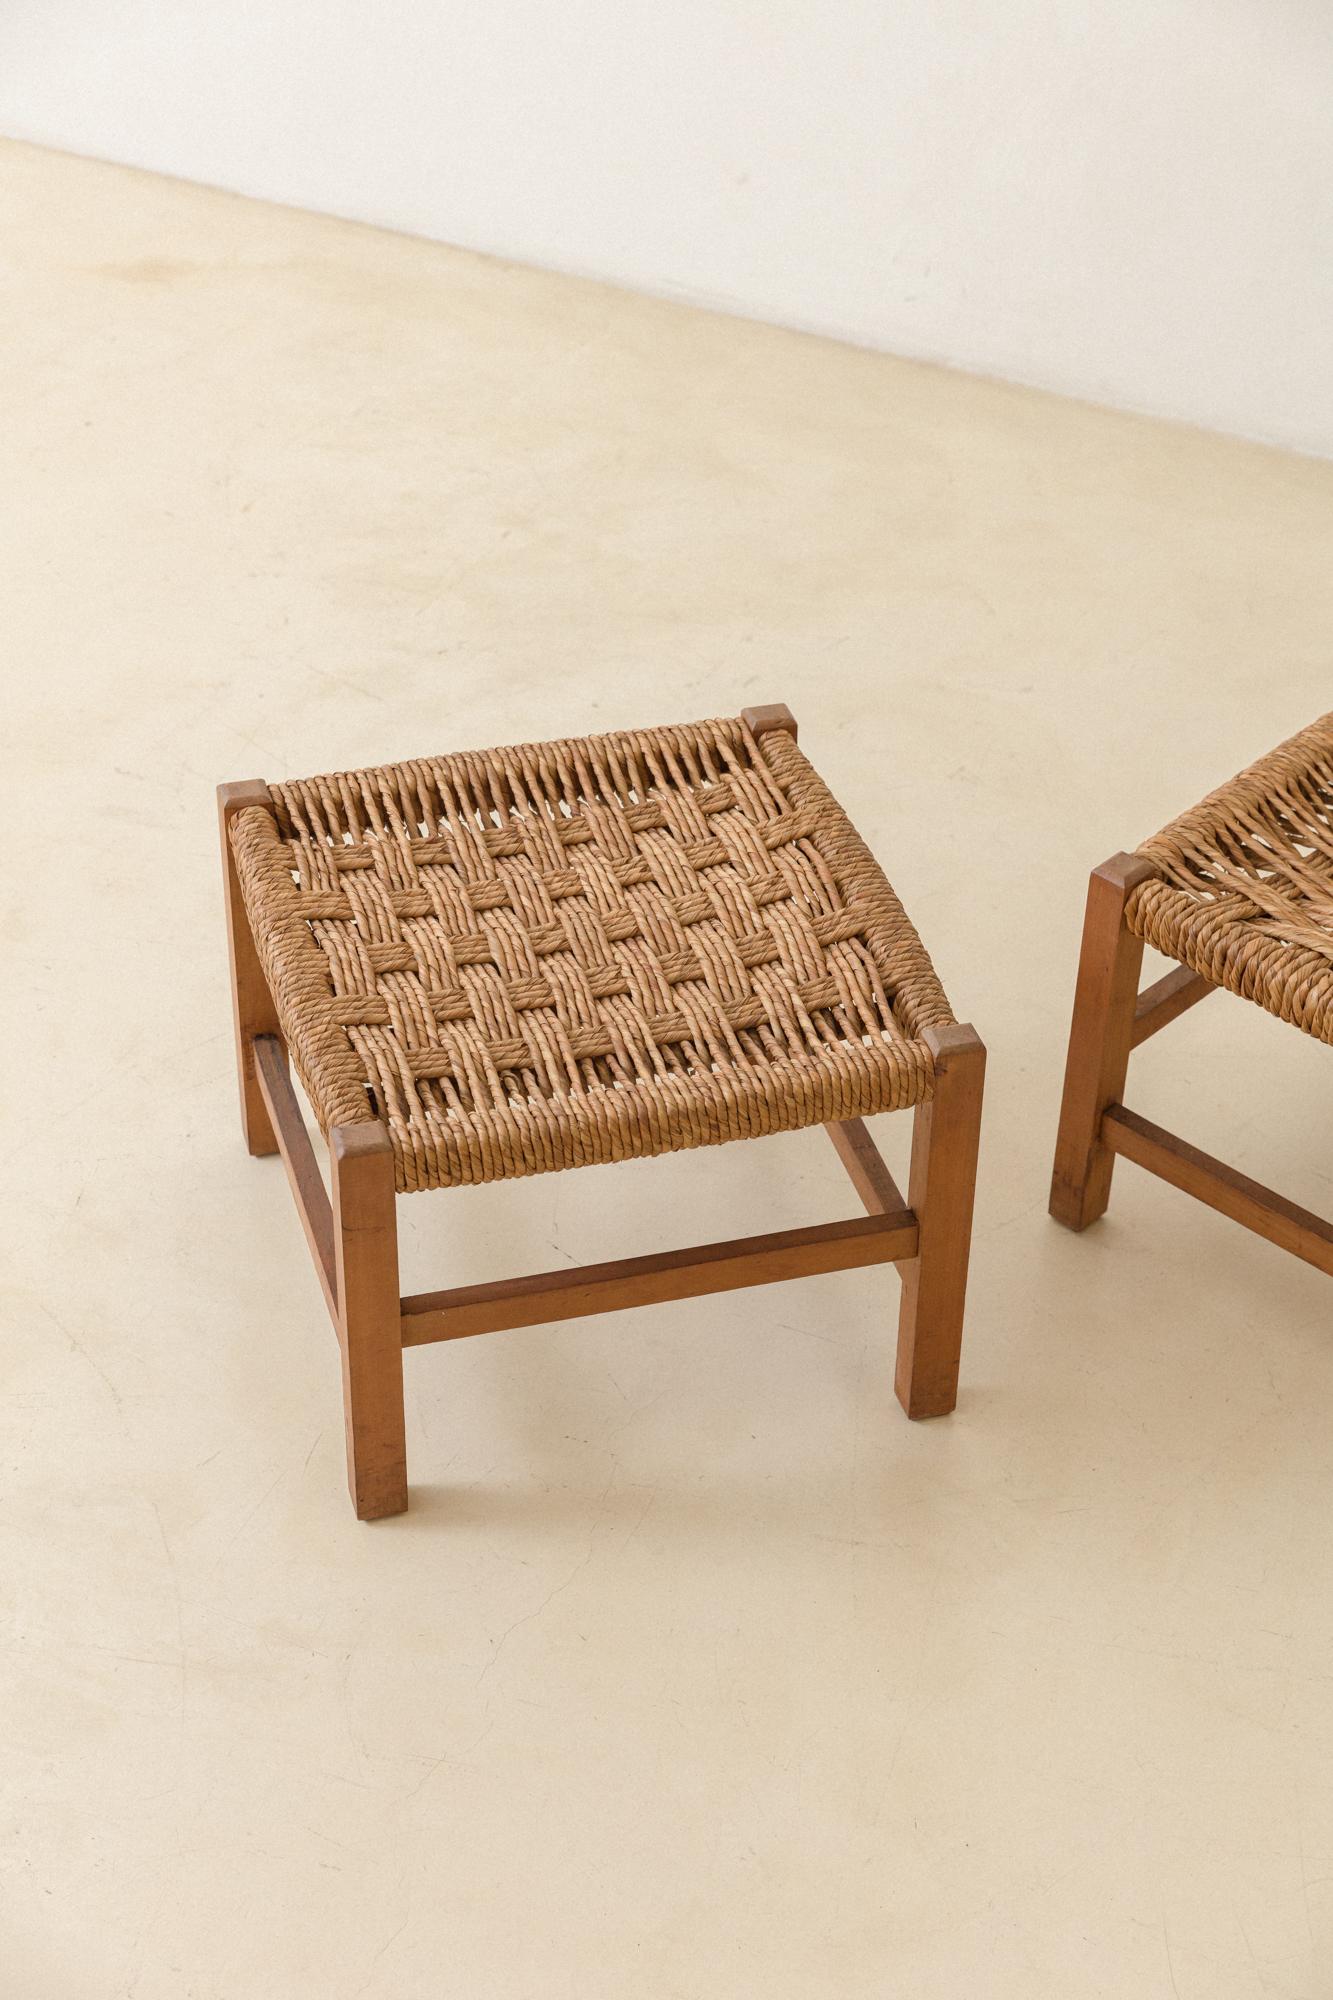 Hand-Woven Pair of Brazilian Stools, Rosewood and Taboa Straw, Unknown Designer, 1960s For Sale